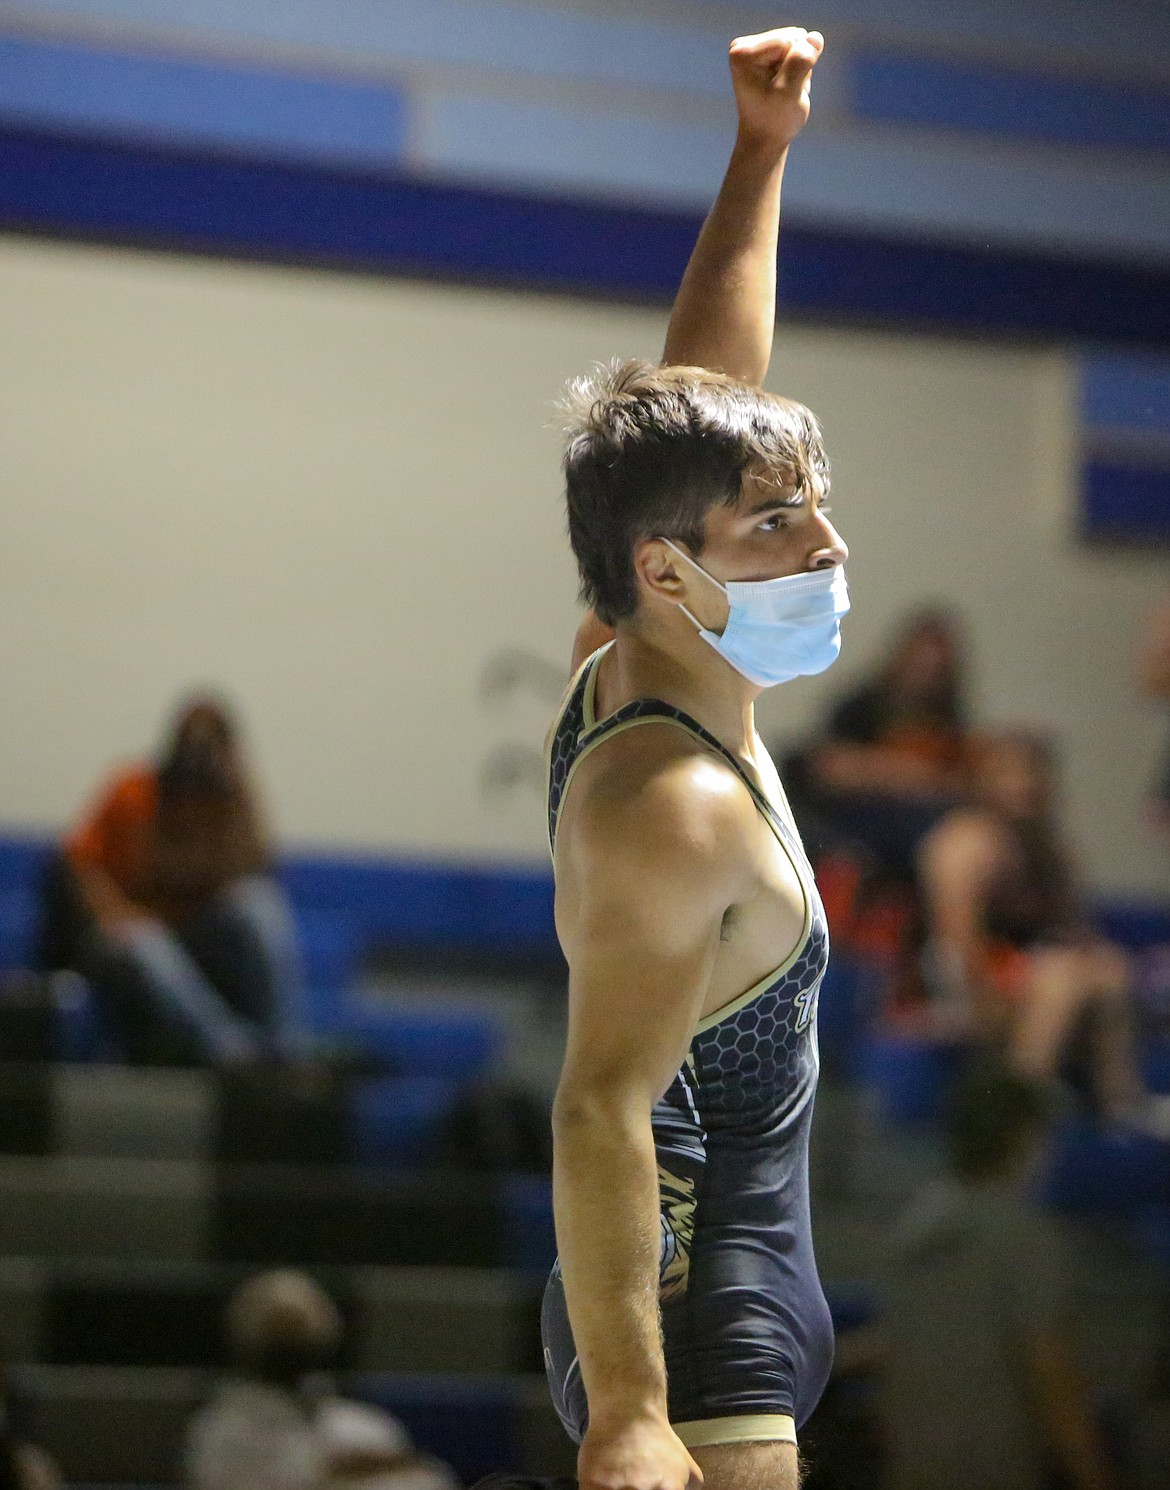 Royal High School senior Dominic Martinez holds his hand high after winning his match against Wahluke High School's Sergio Tapia on Saturday afternoon in Warden.